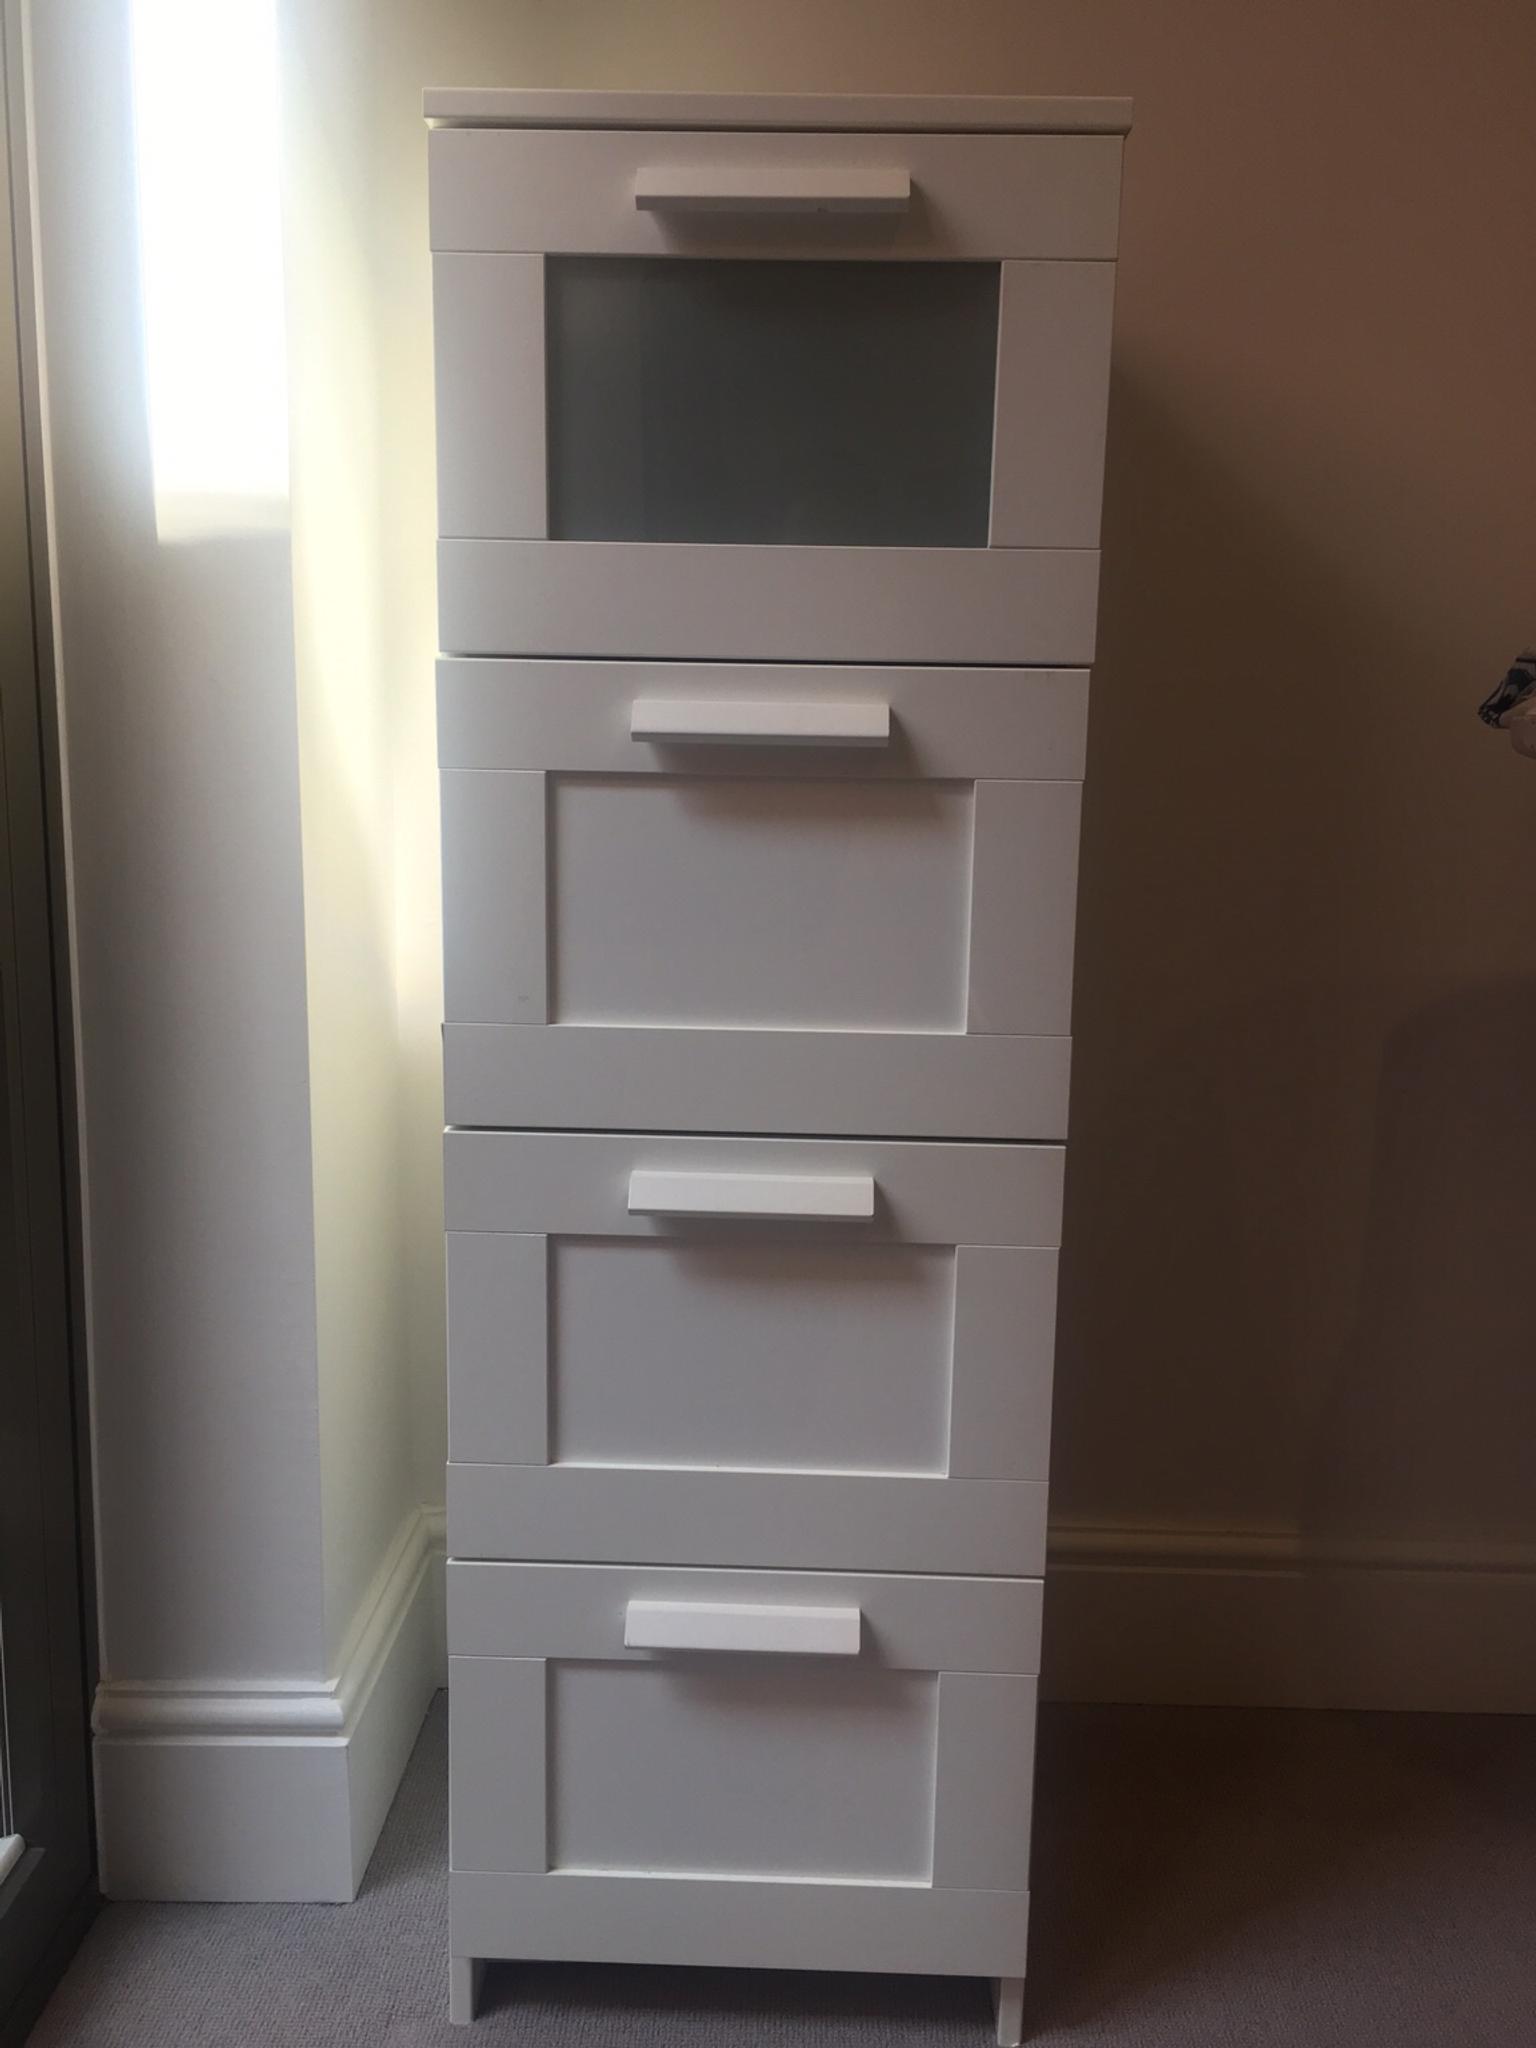 Ikea Brimnes Chest Of Drawers In Sw18 Wandsworth For 20 00 For